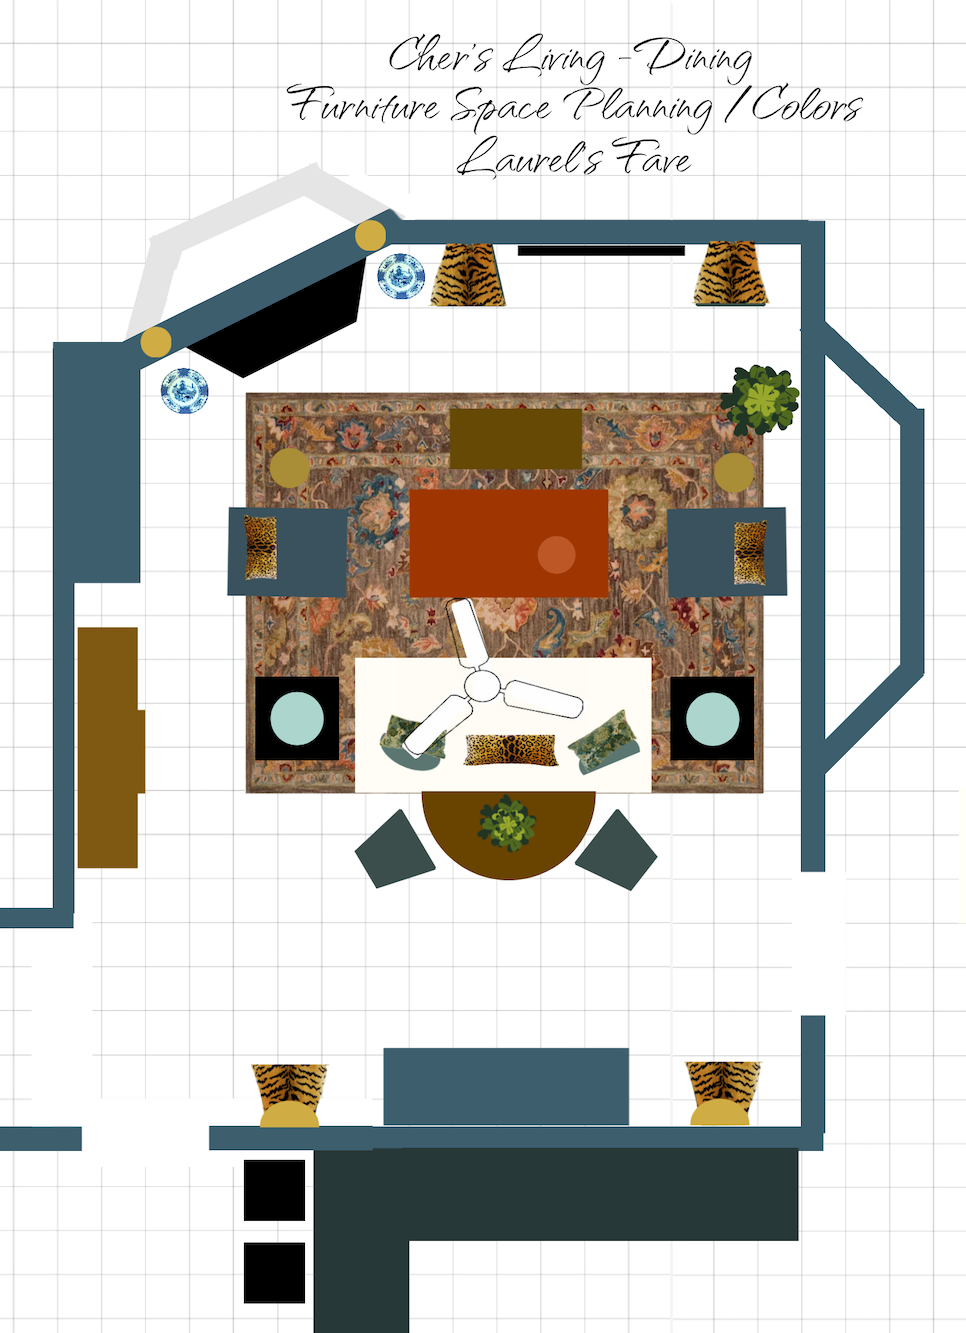 Cher's living dining room layout - brown rug-space planning - colors - white sofa